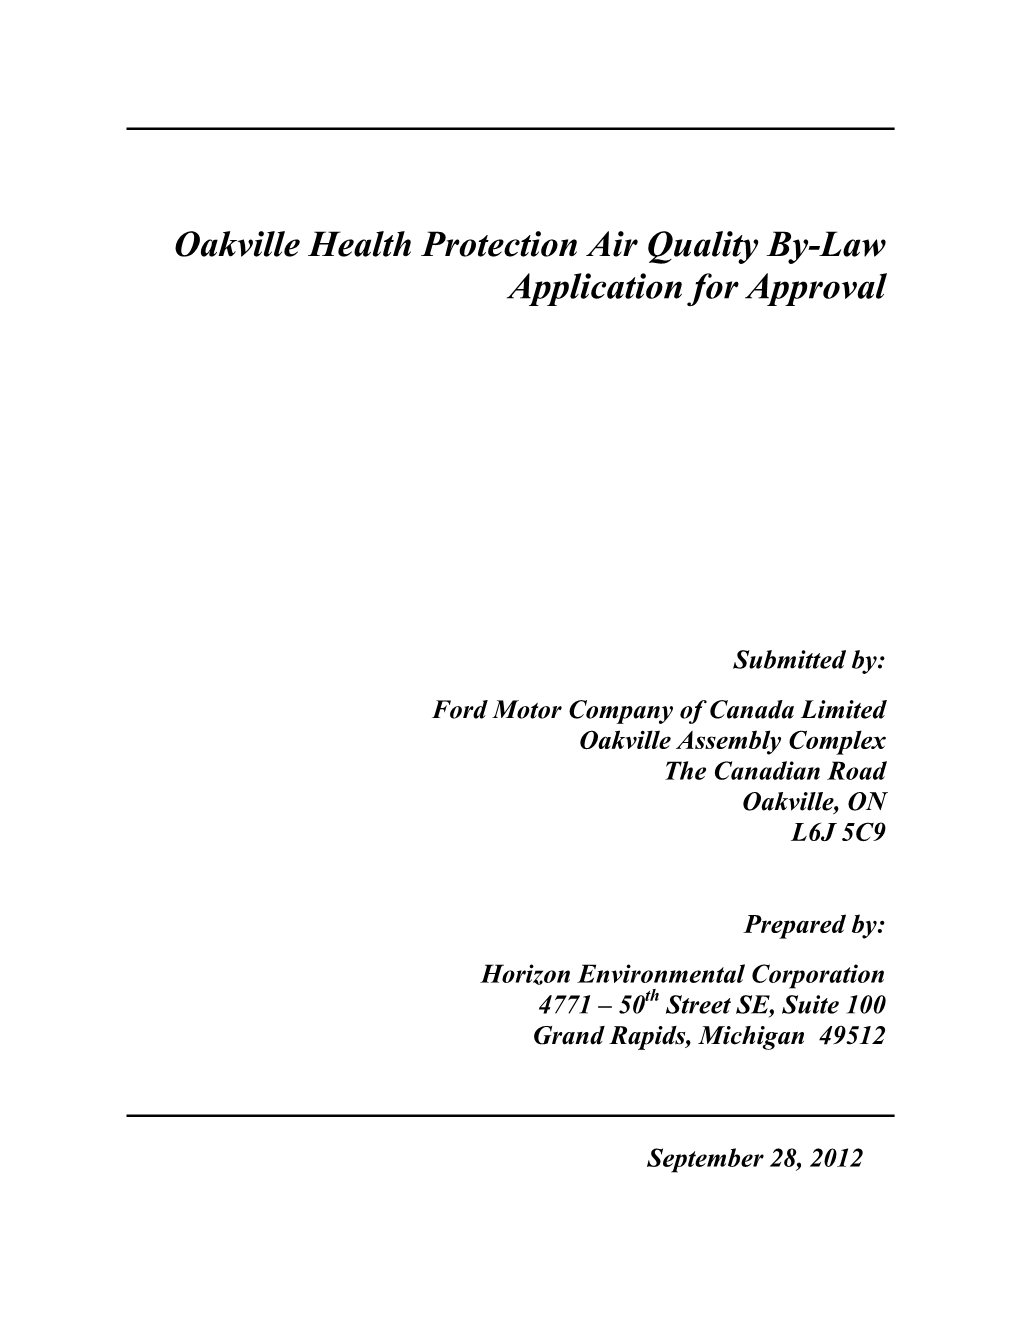 Oakville Health Protection Air Quality By-Law Application for Approval